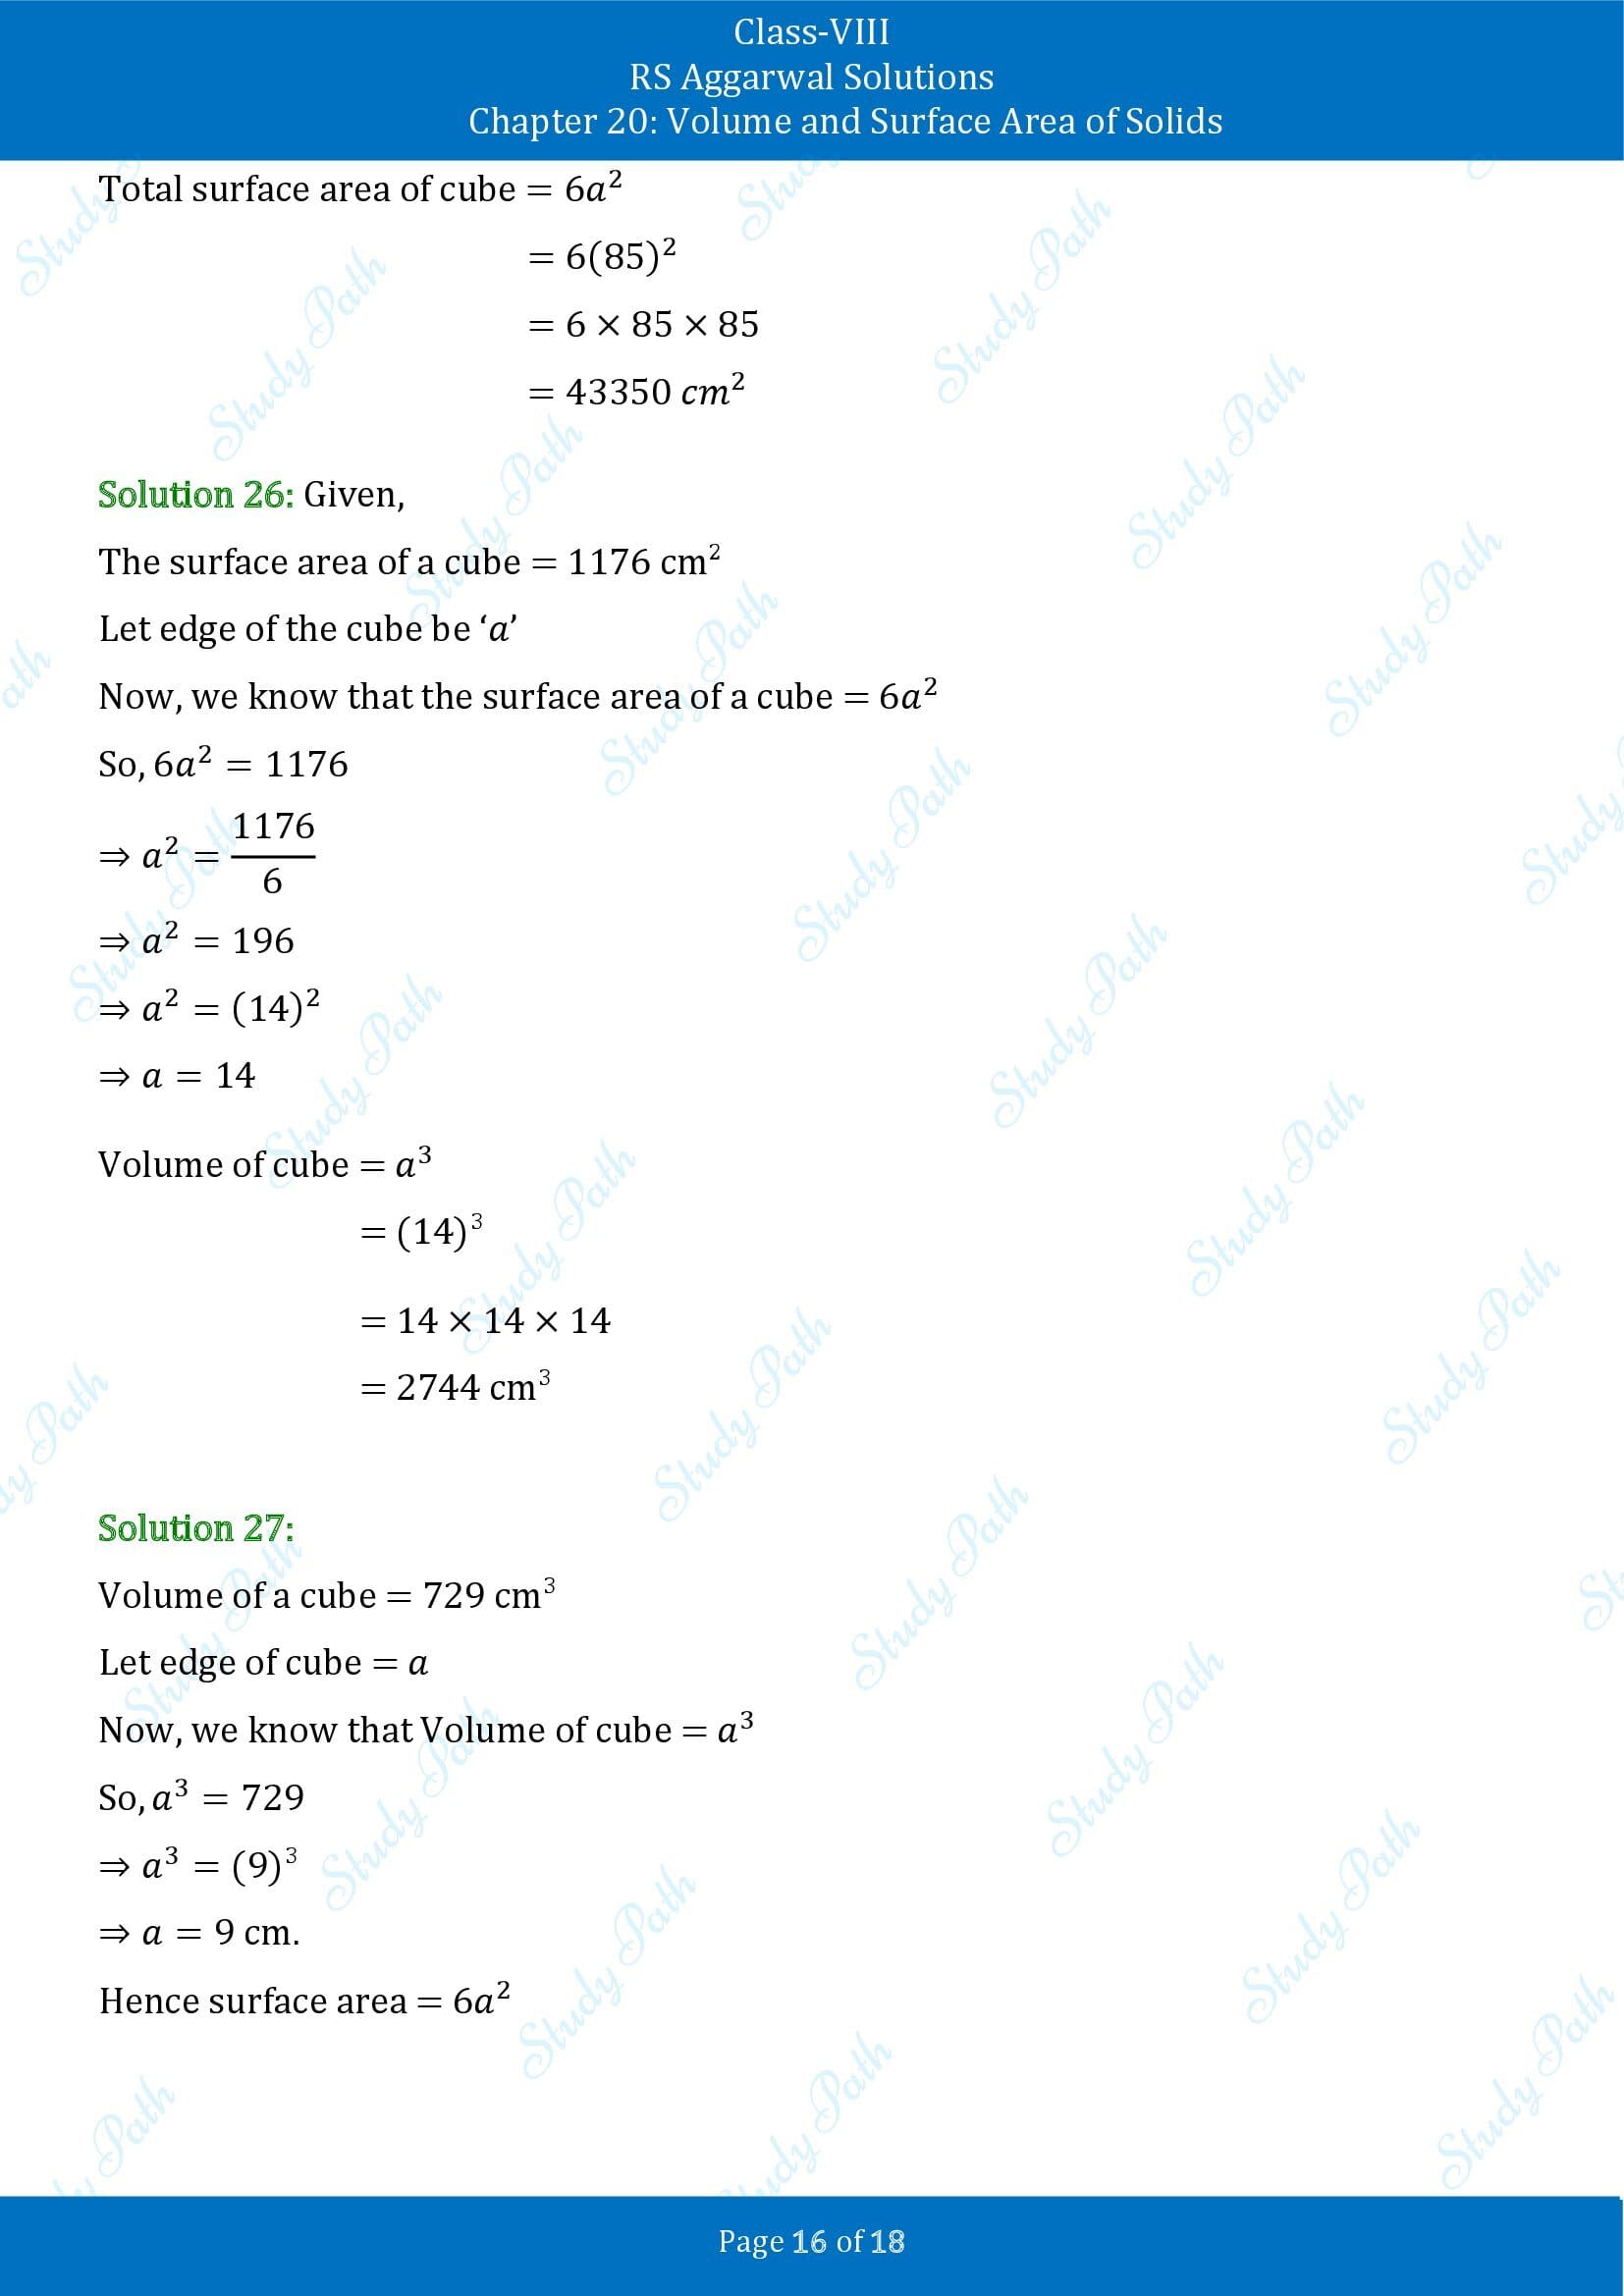 RS Aggarwal Solutions Class 8 Chapter 20 Volume and Surface Area of Solids Exercise 20A 00016